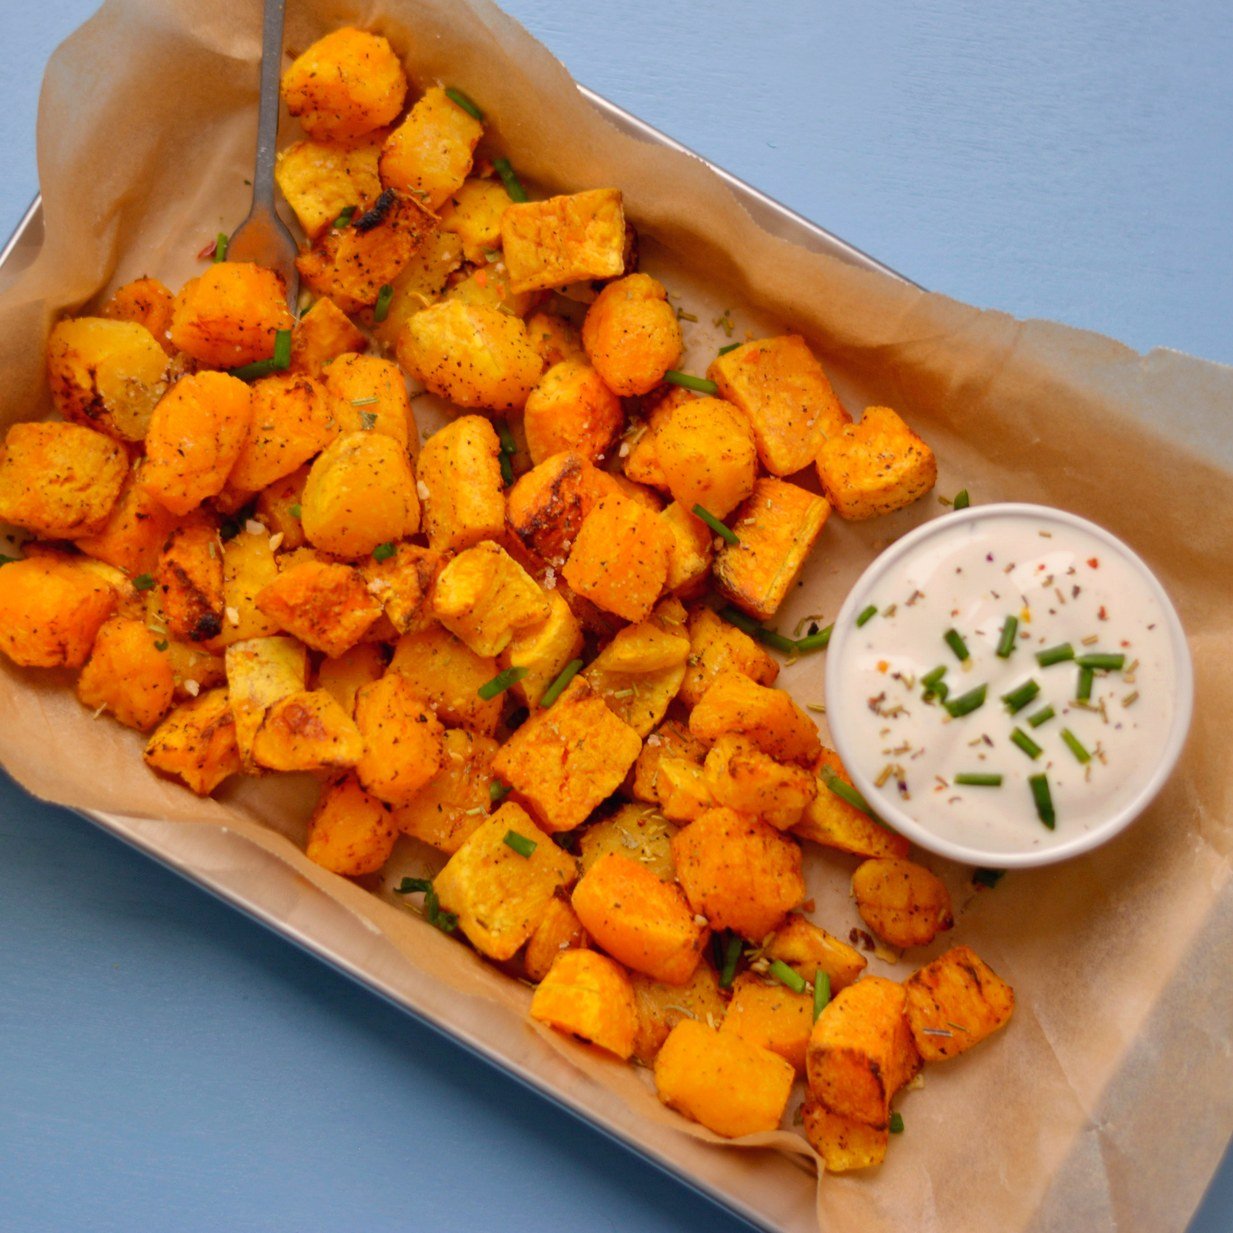 Overhead view of butternut squash cubes in a tray.